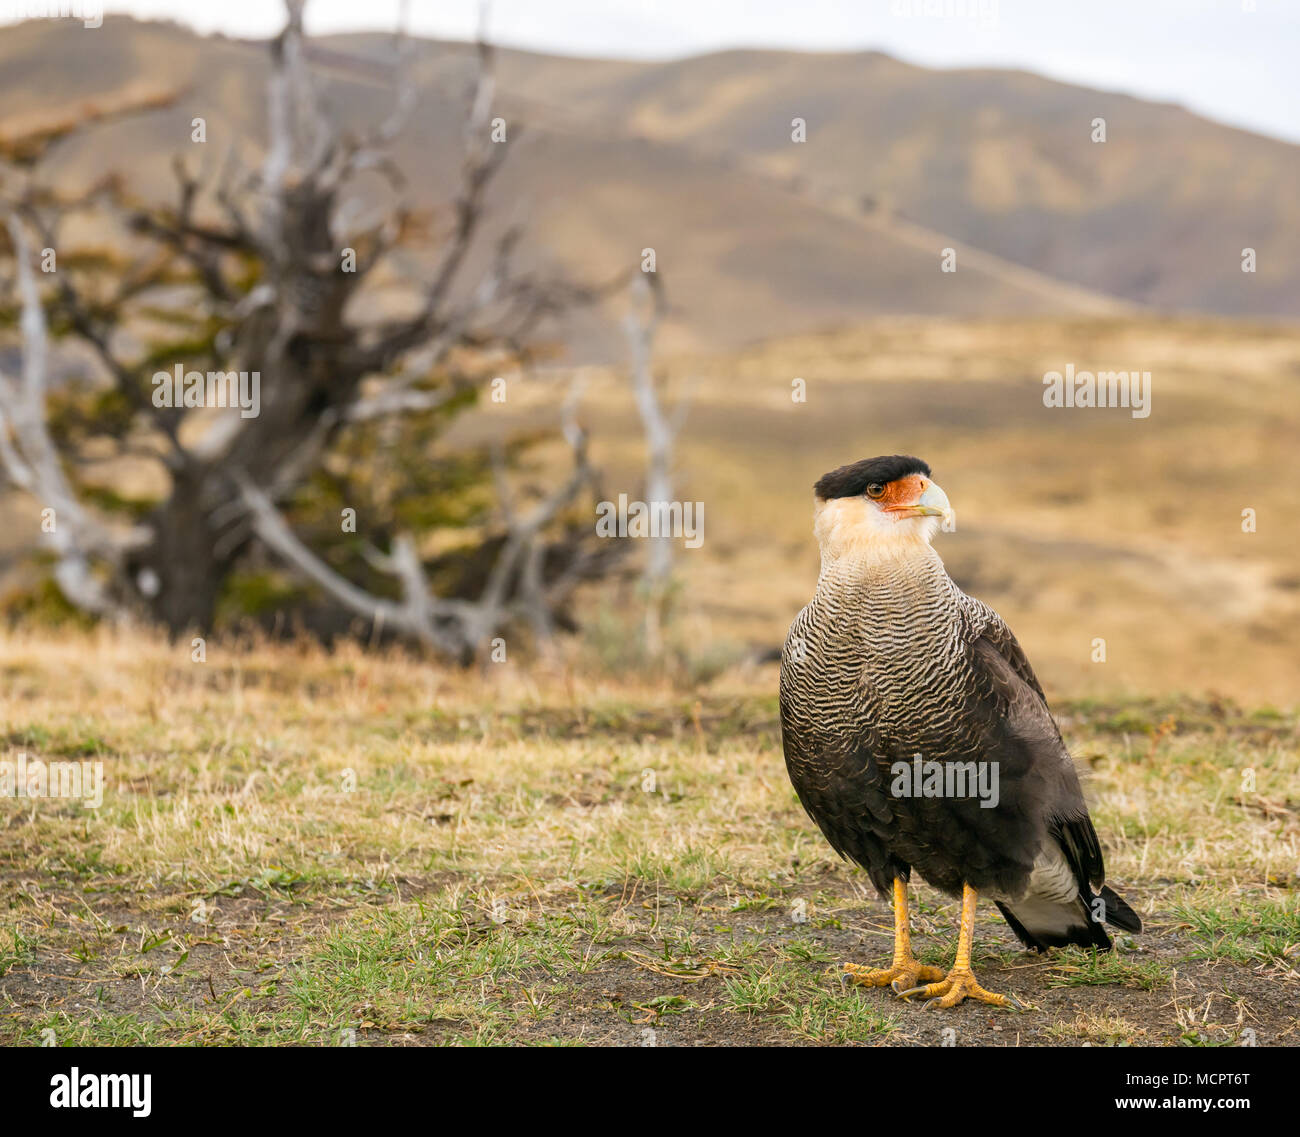 Southern crested caracara, Caracara plancus, Torres del Paine National Park, Patagonia, Chile, South America Stock Photo